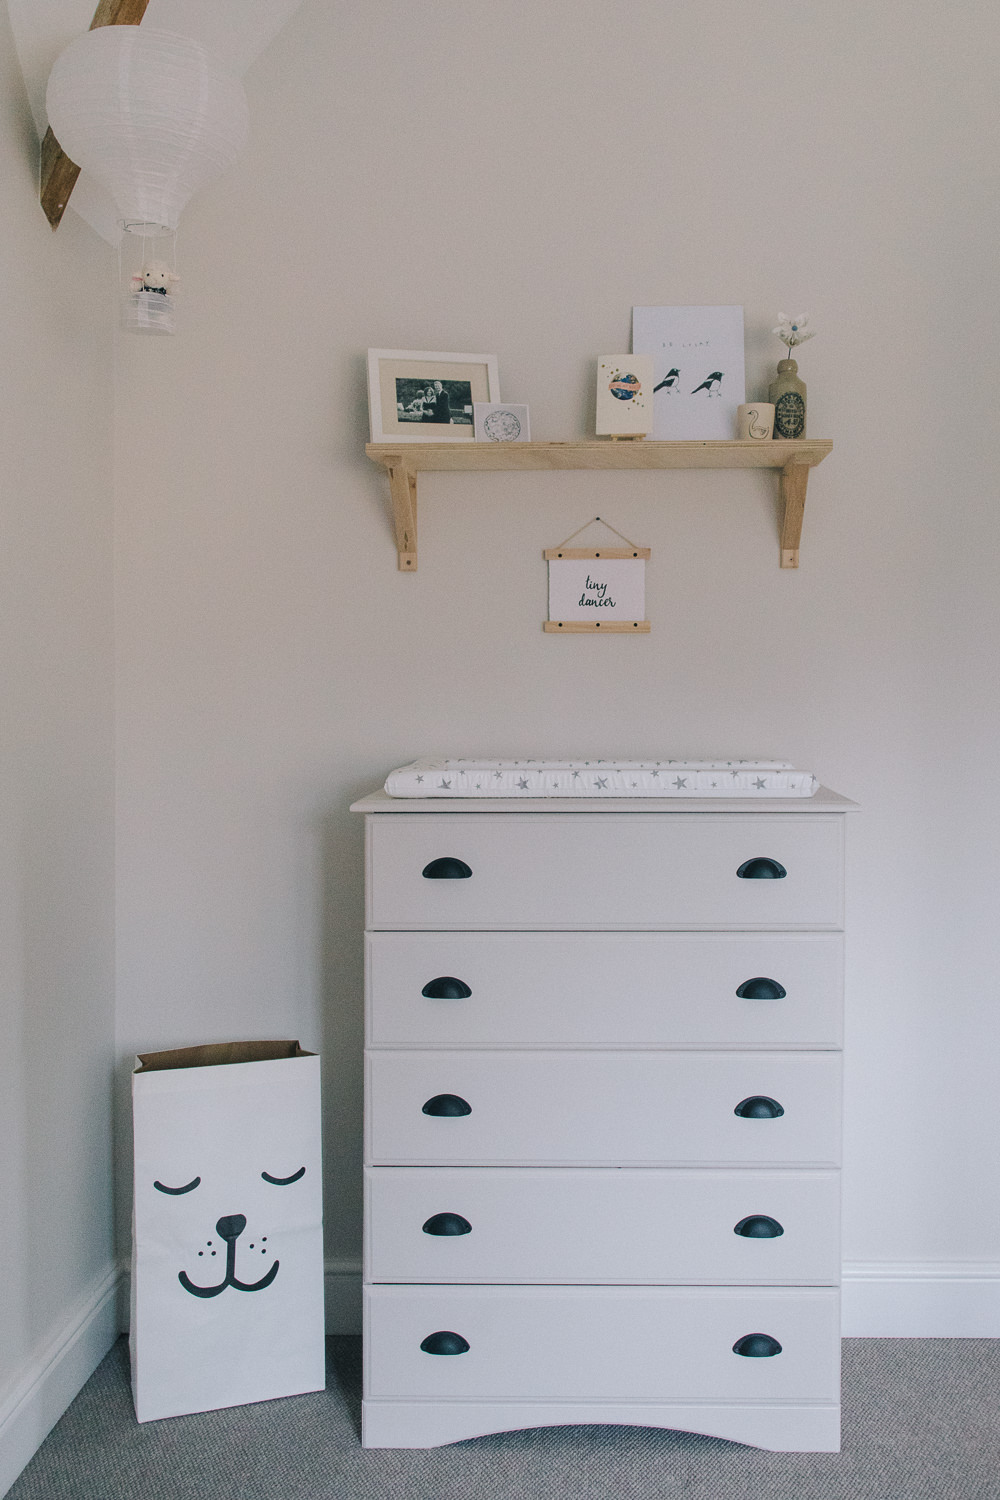 Plywood shelf over painted changing table